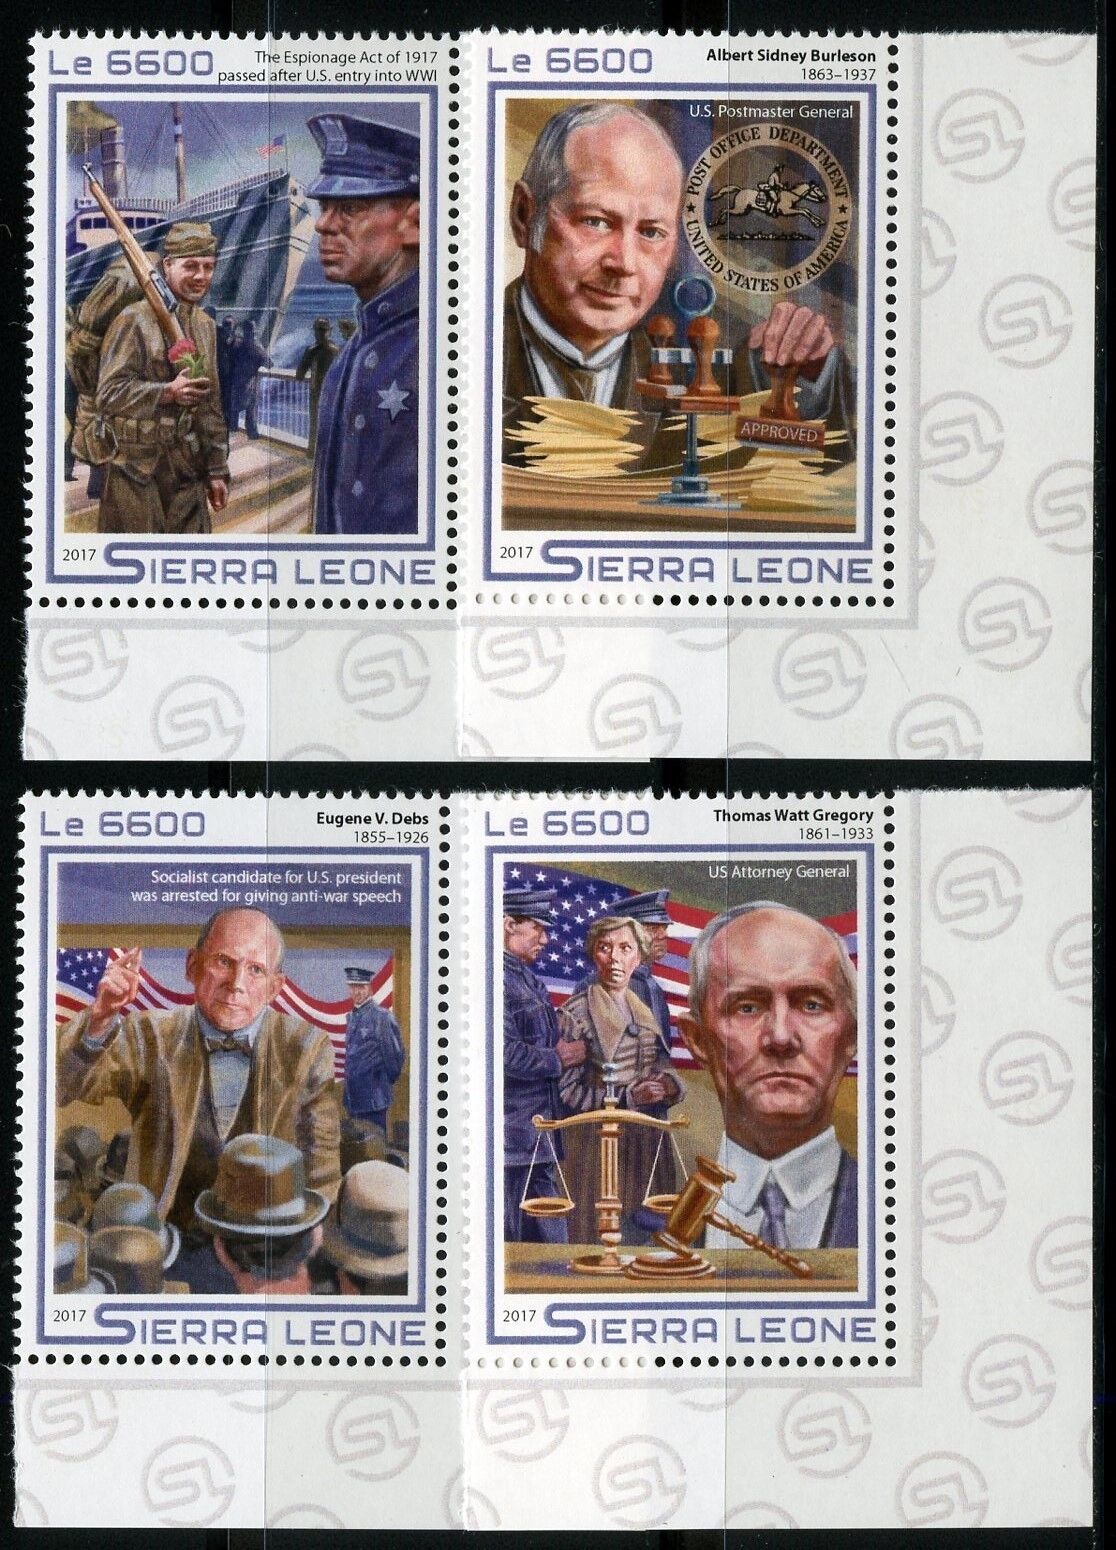 SIERRA LEONE 2017 100th ANNIVERSARY ACT THE ESPIONAGE excellence OF Max 45% OFF SET